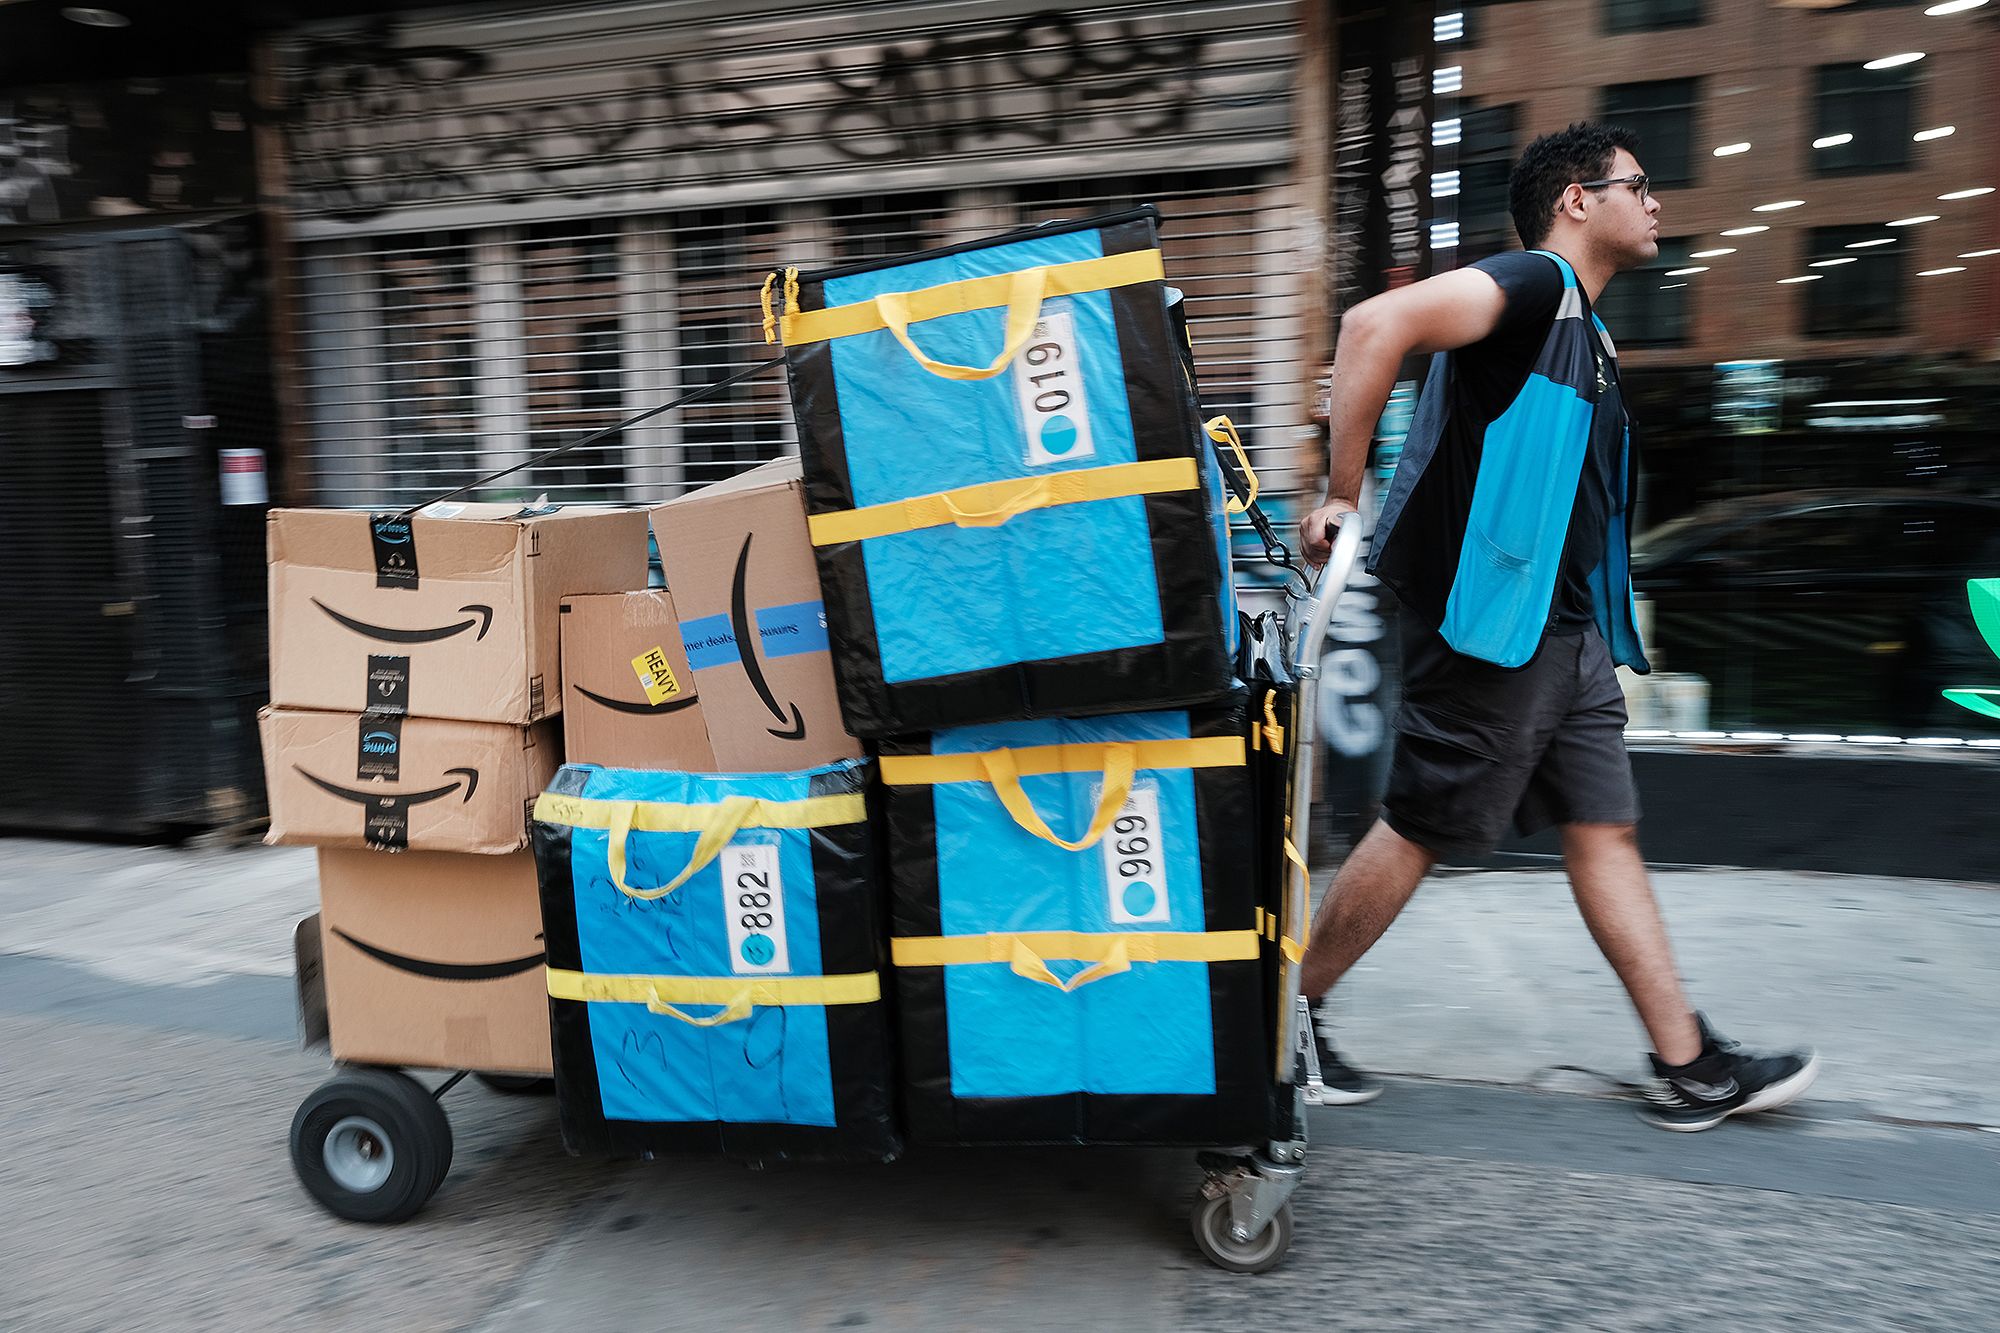  More Prime Day items sold this year than last